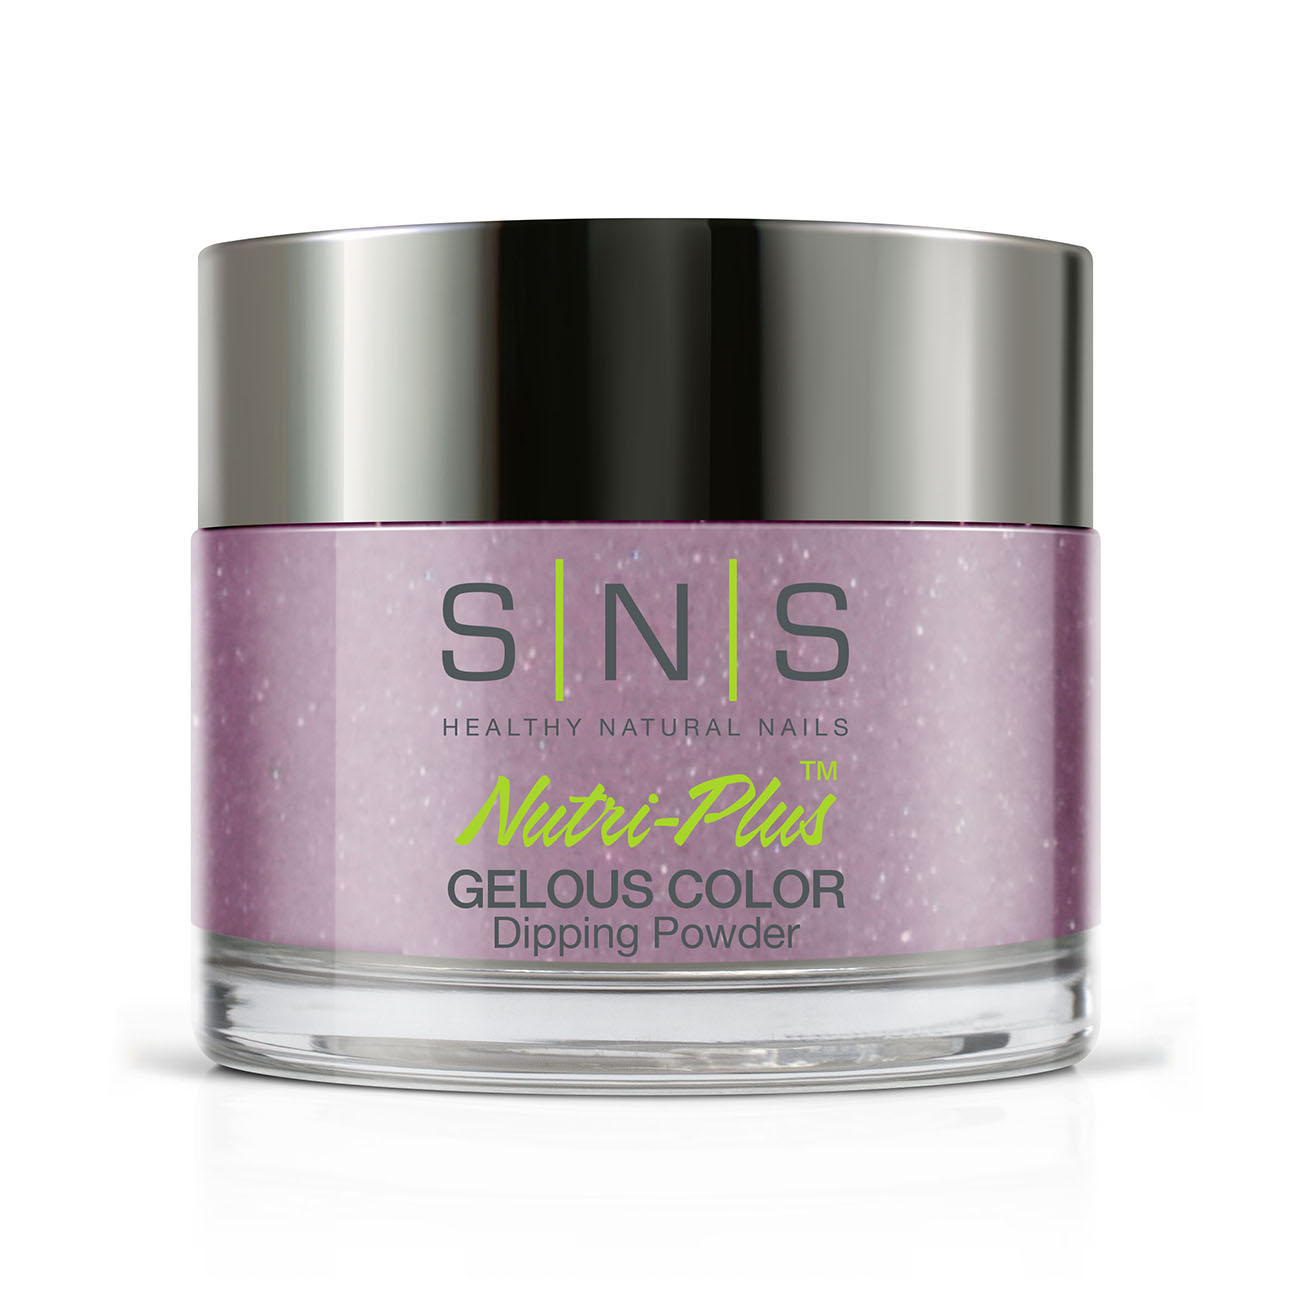 SNS Nails BOS17 Pale Orchid 28g (1oz) | Gelous Dipping Powder